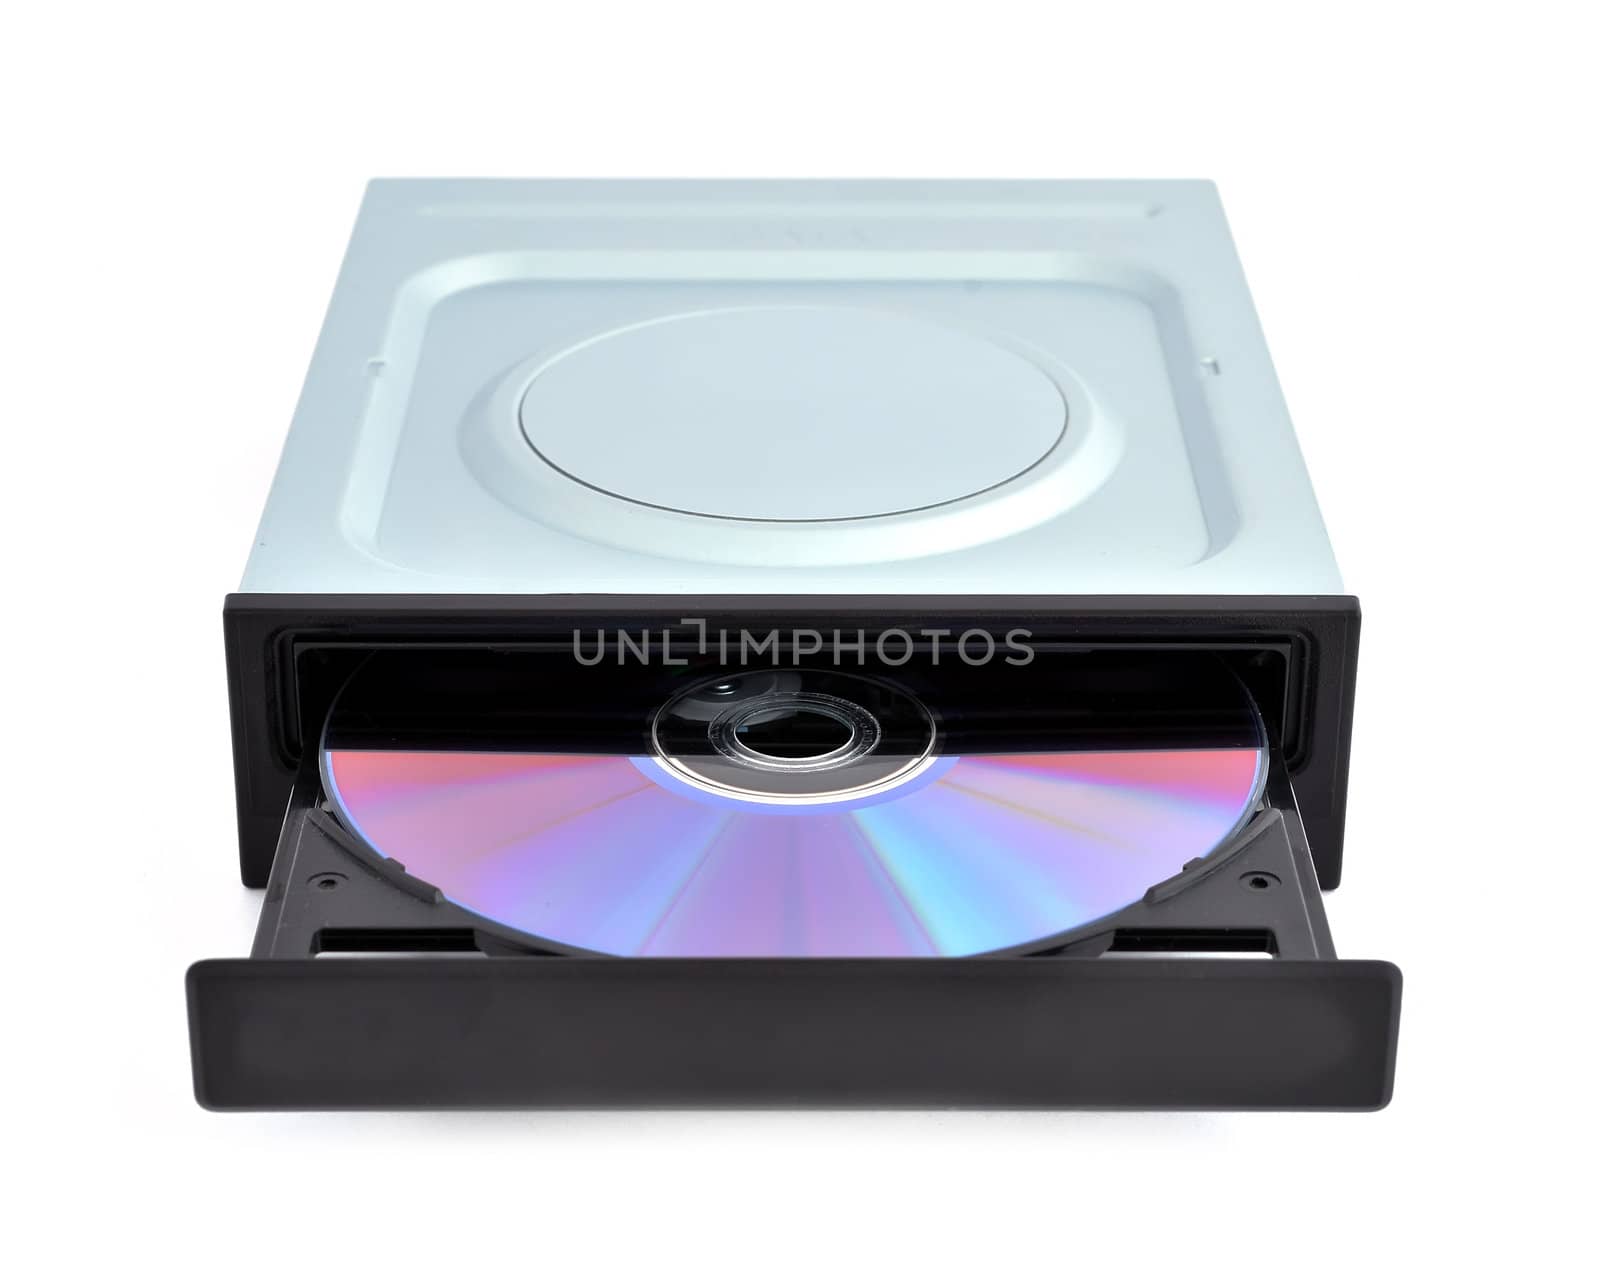 open dvd rom from a CD